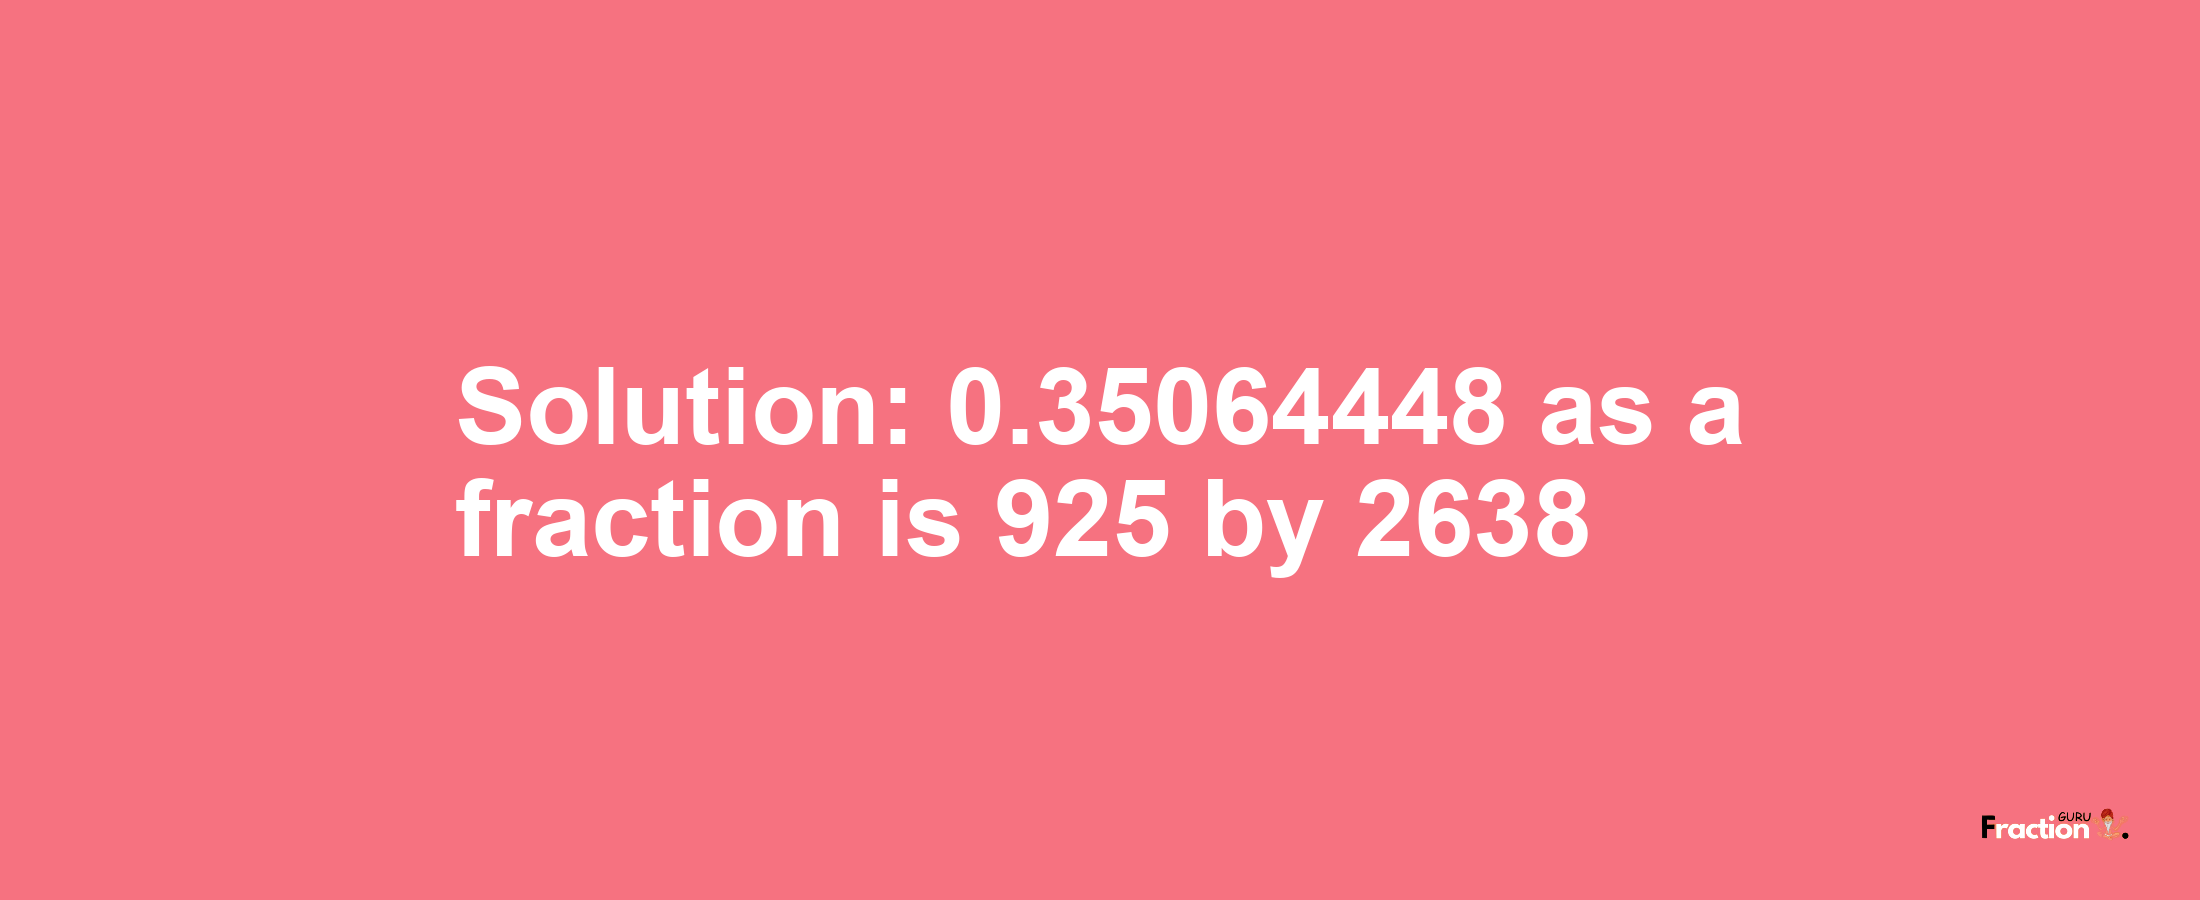 Solution:0.35064448 as a fraction is 925/2638